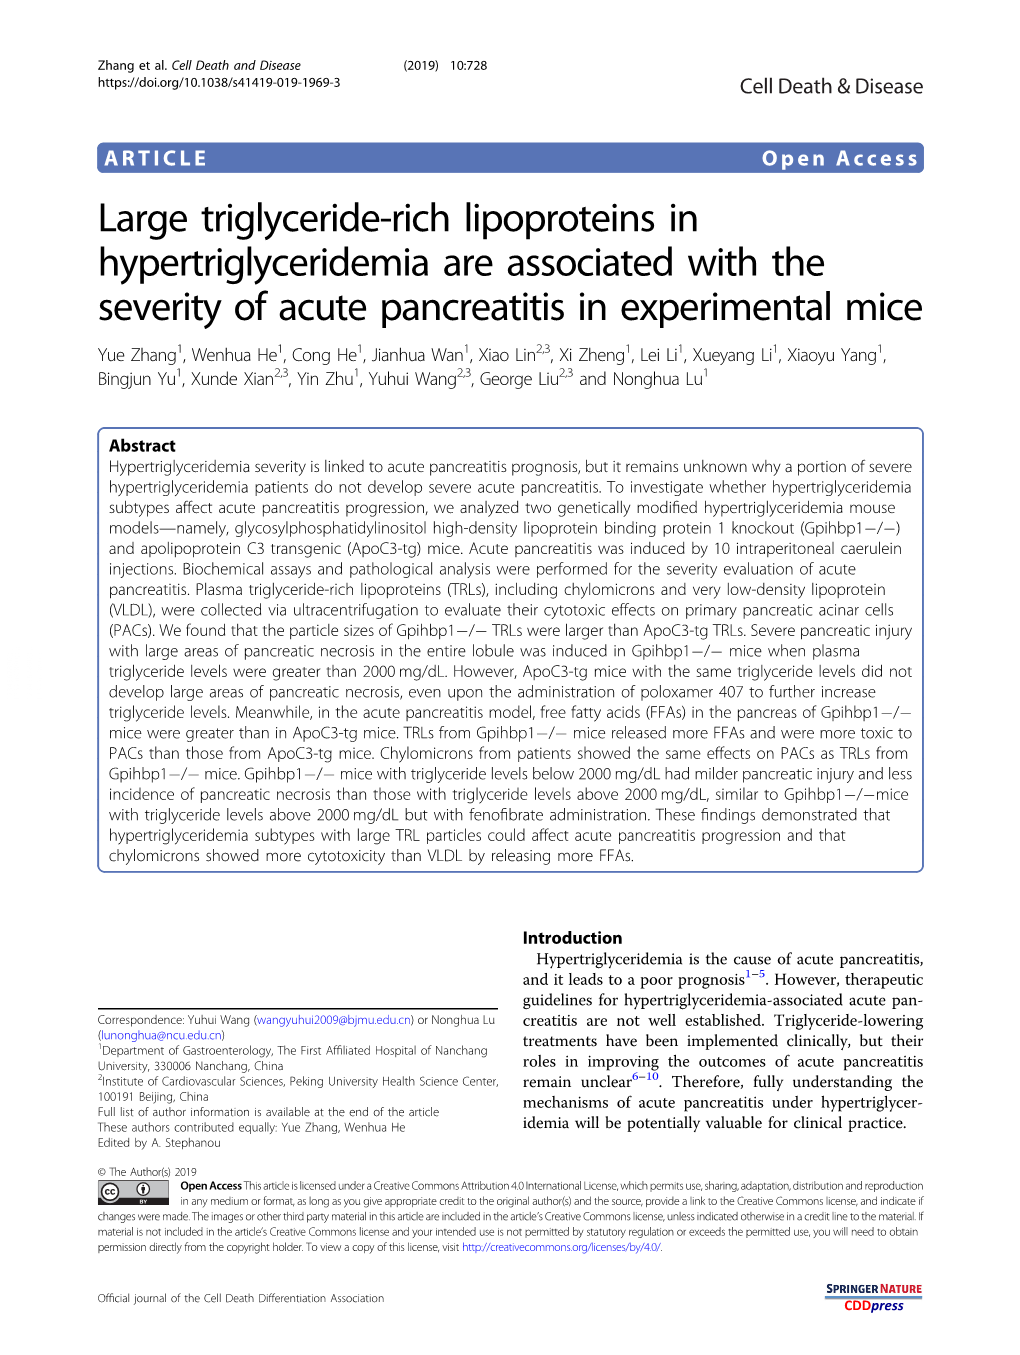 Large Triglyceride-Rich Lipoproteins in Hypertriglyceridemia Are Associated